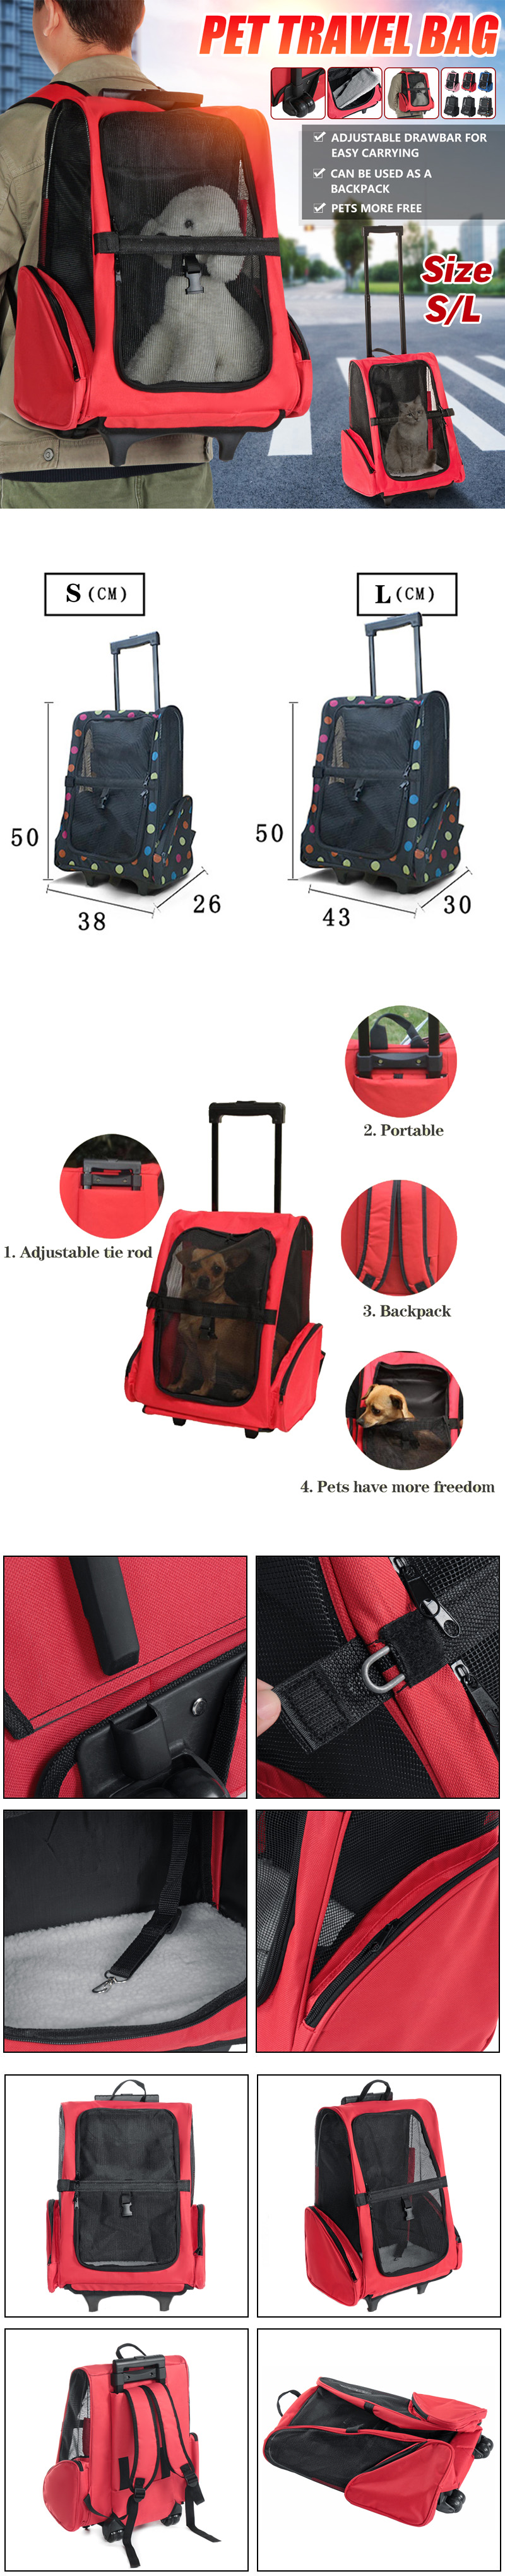 2-In-1-Pet-Carrier-Backpack-Dog-Cat-Puppy-Cart-Breathable-Outdoor-Travel-Bag-1615922-1